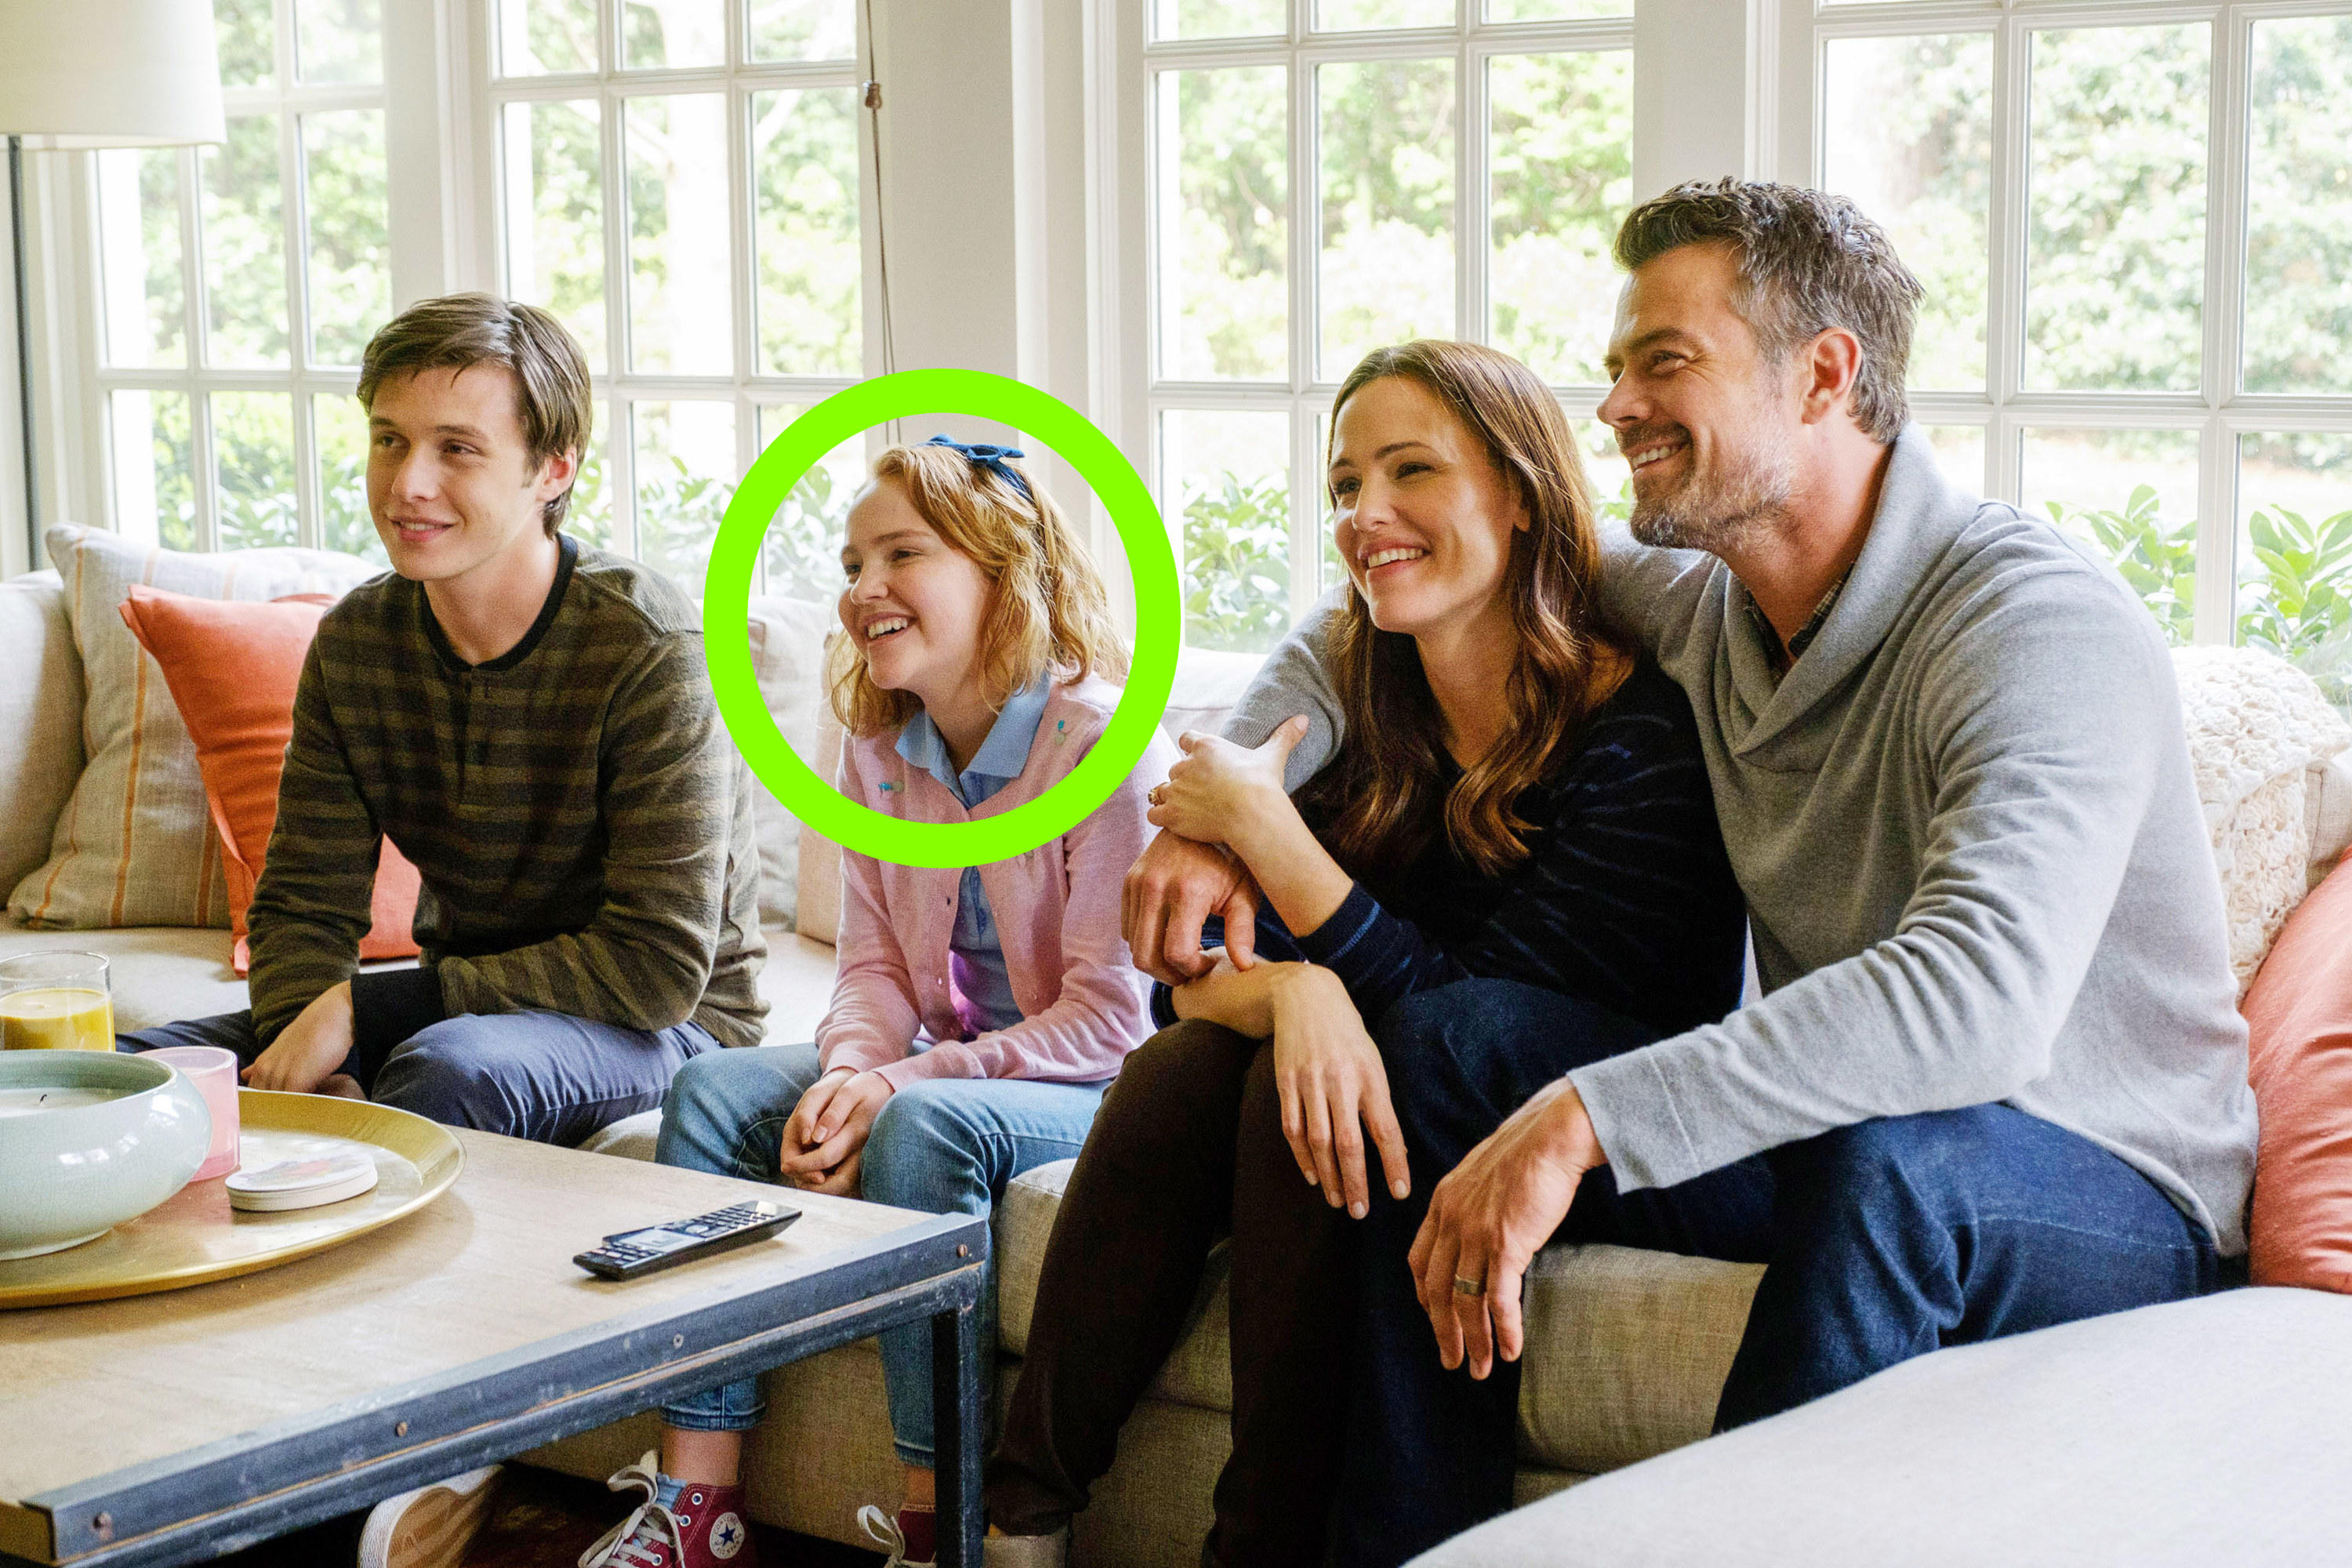 Simon and his family with his sister circled